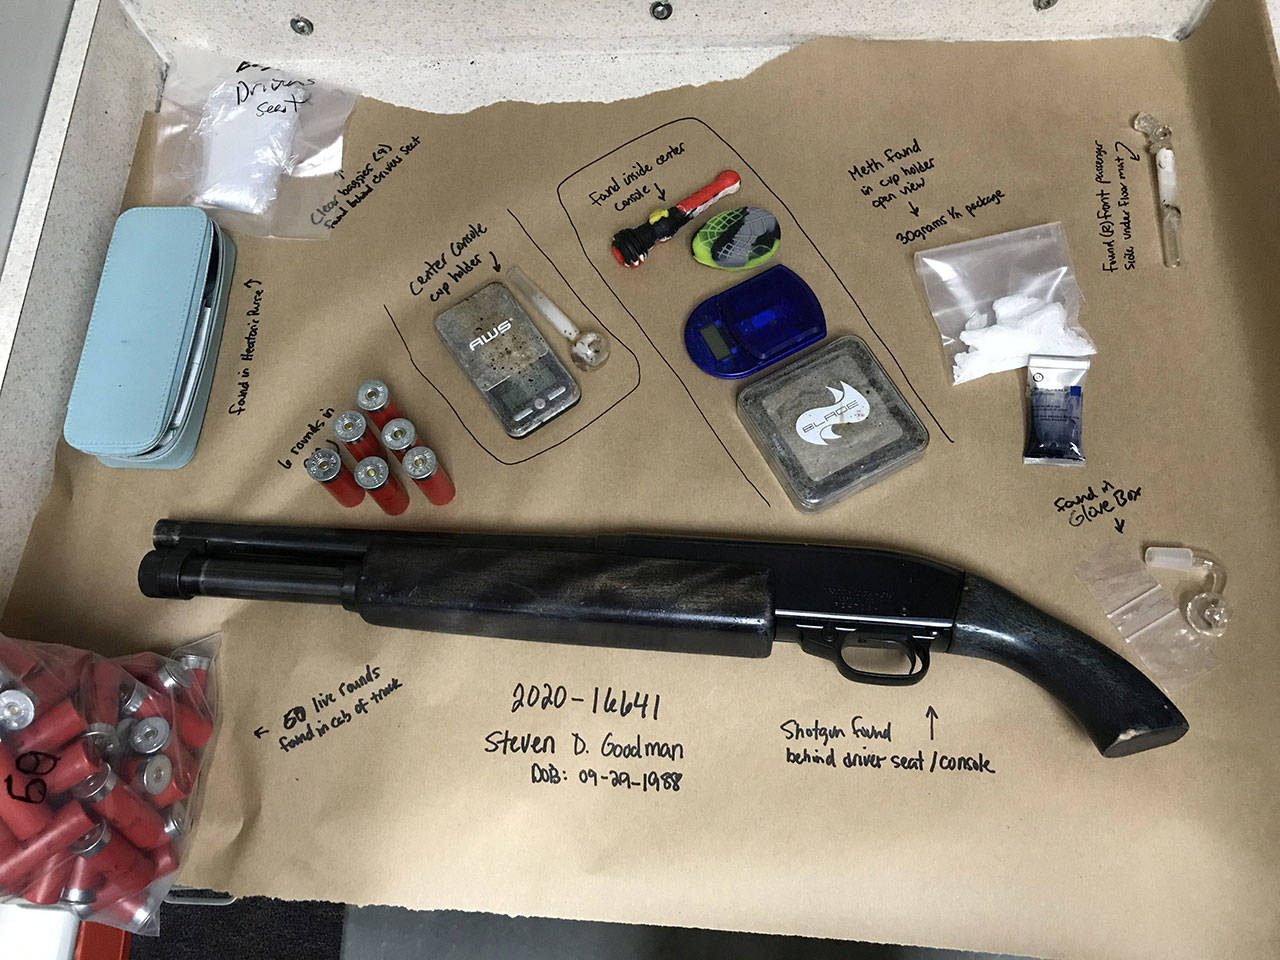 A number of the items recovered from the Aug. 17 traffic stop. (Photo courtesy of Clallam County Sheriff’s Office)